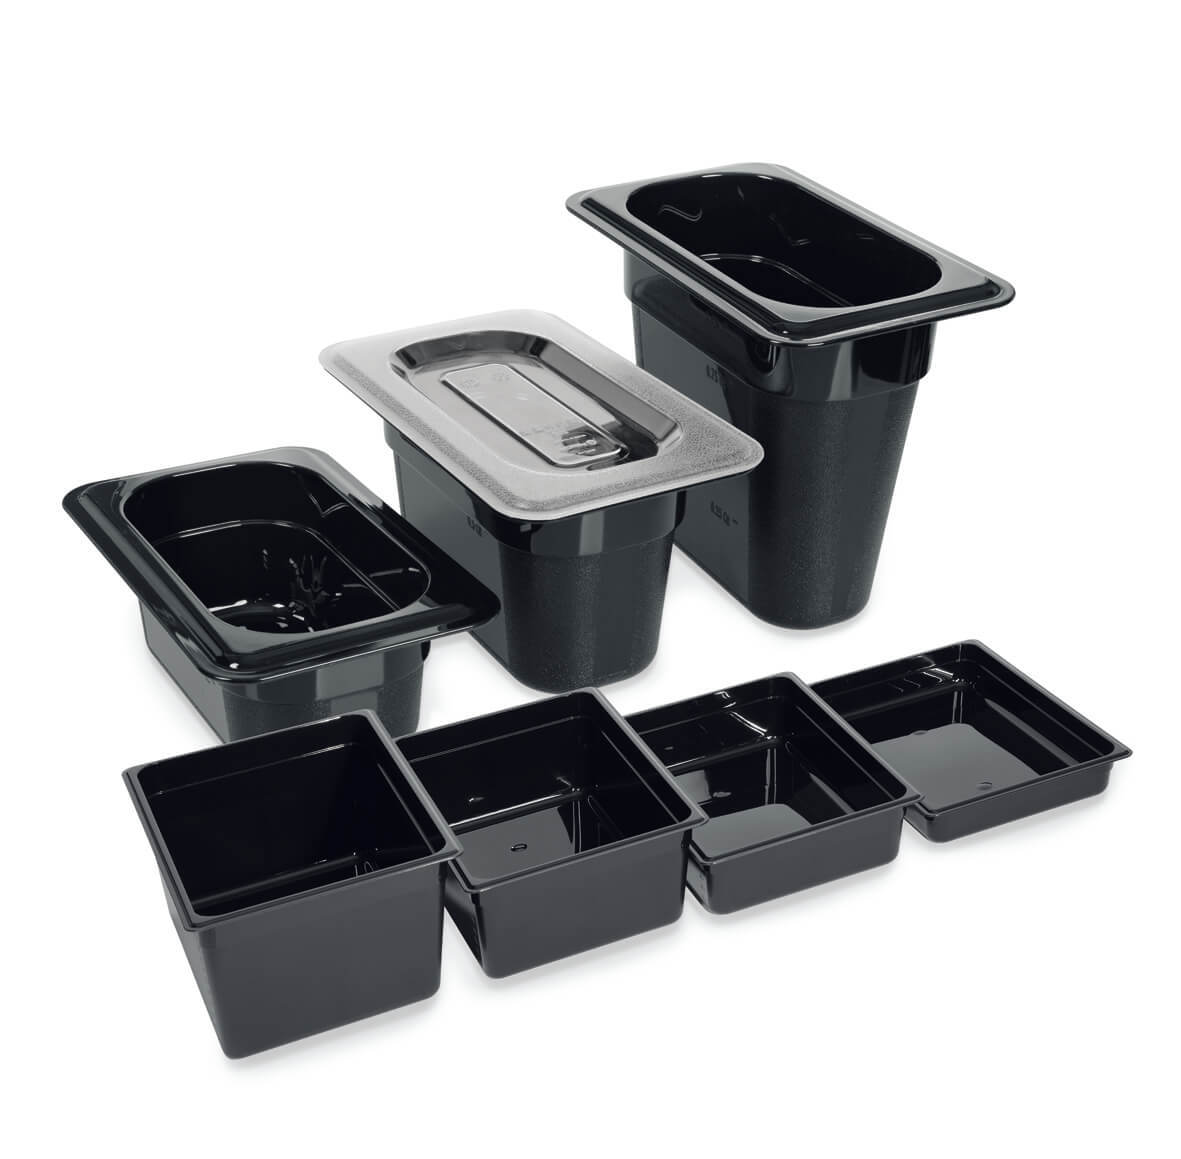 Black polycarbonate dishes